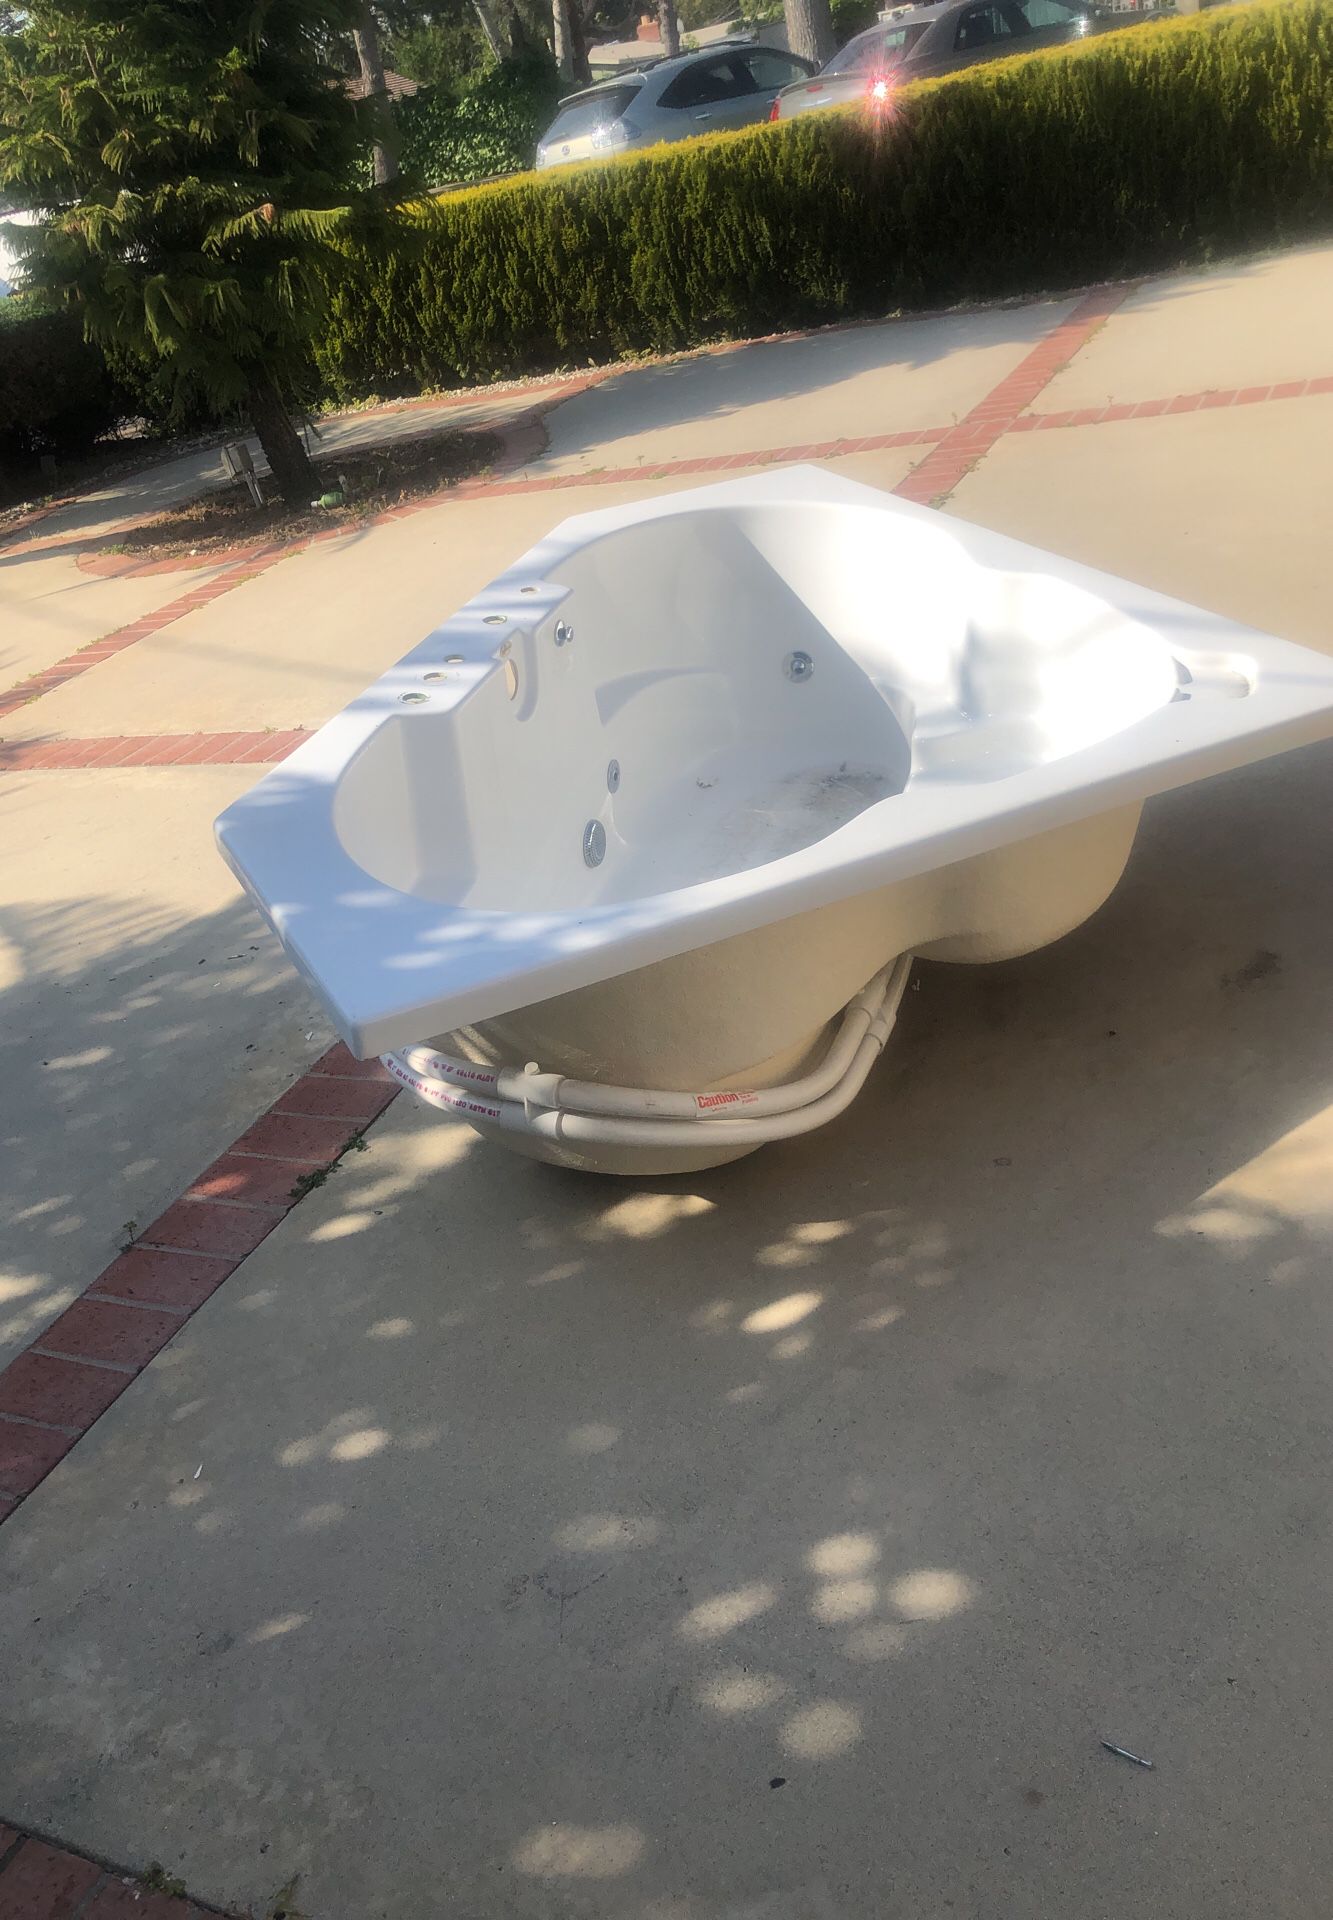 Used but in good condition, Hot tub jacuzzi for sale.. including handles for the tub.